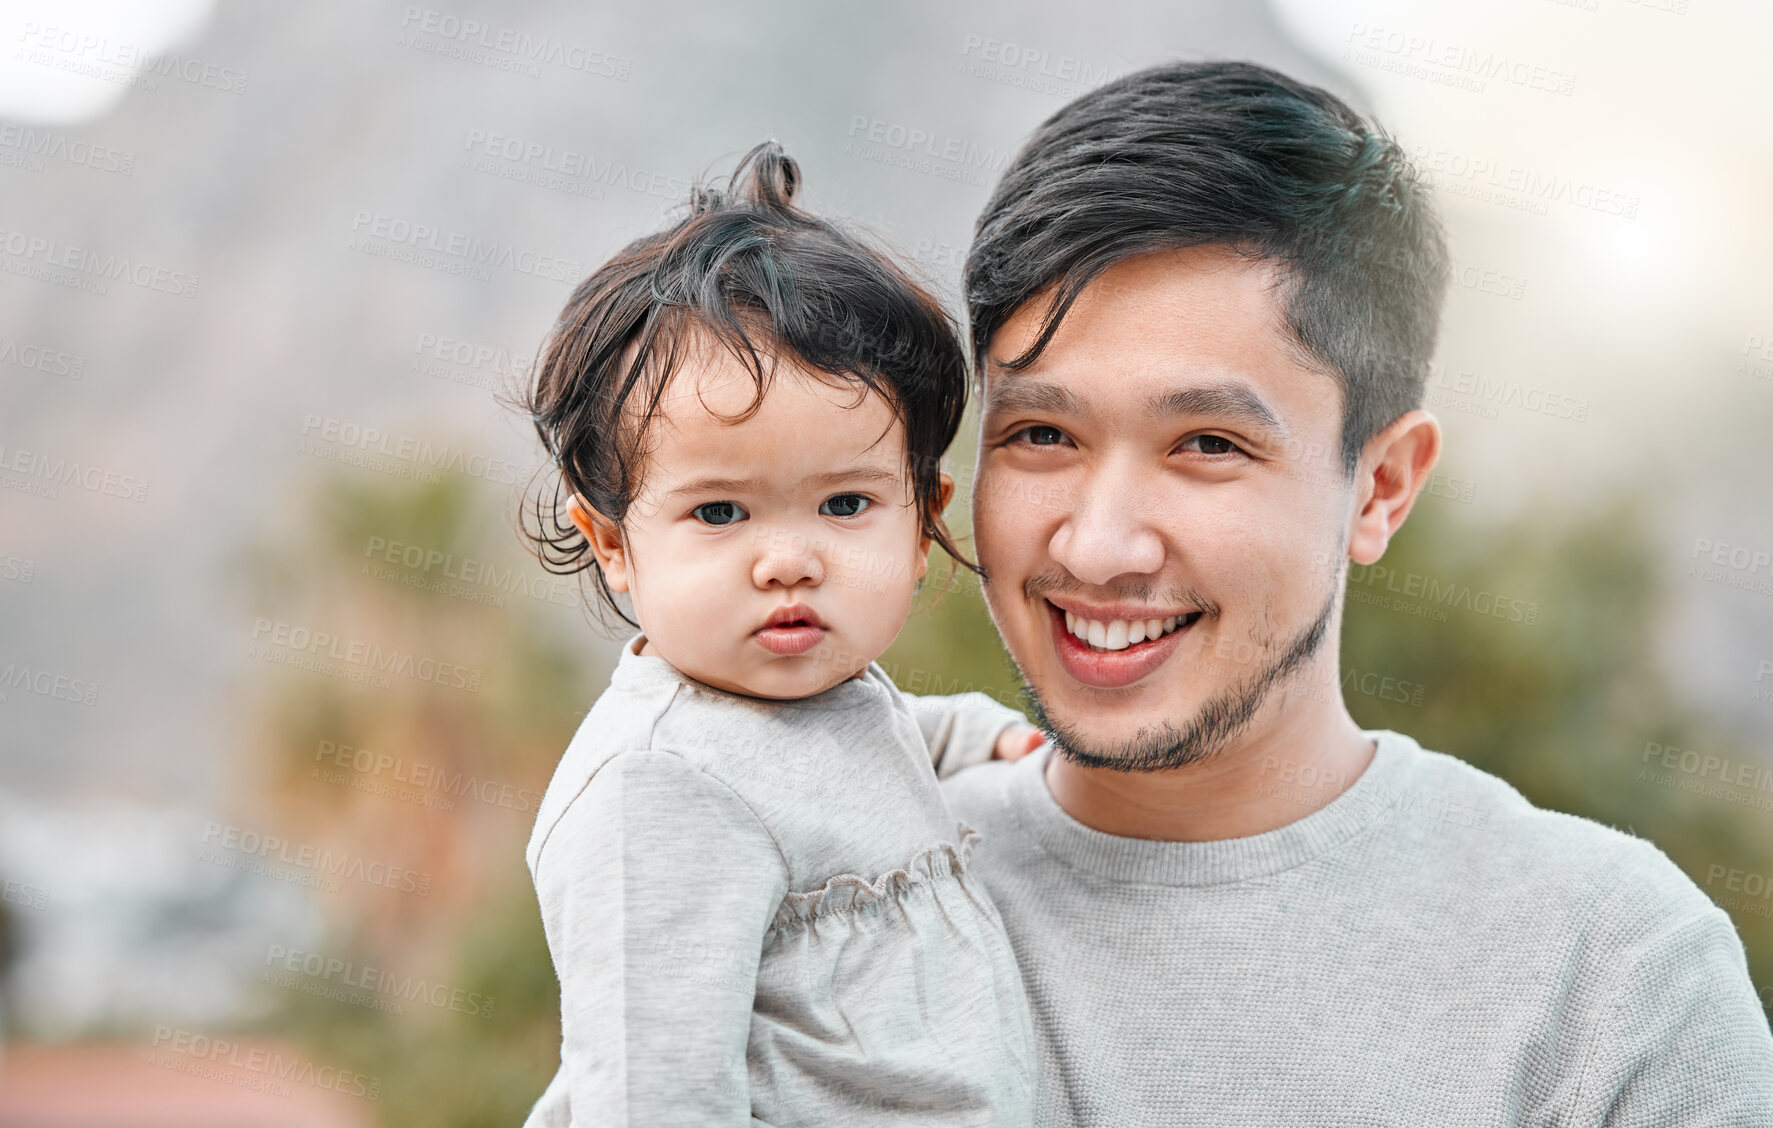 Buy stock photo Shot of a young man bonding with his adorable baby girl